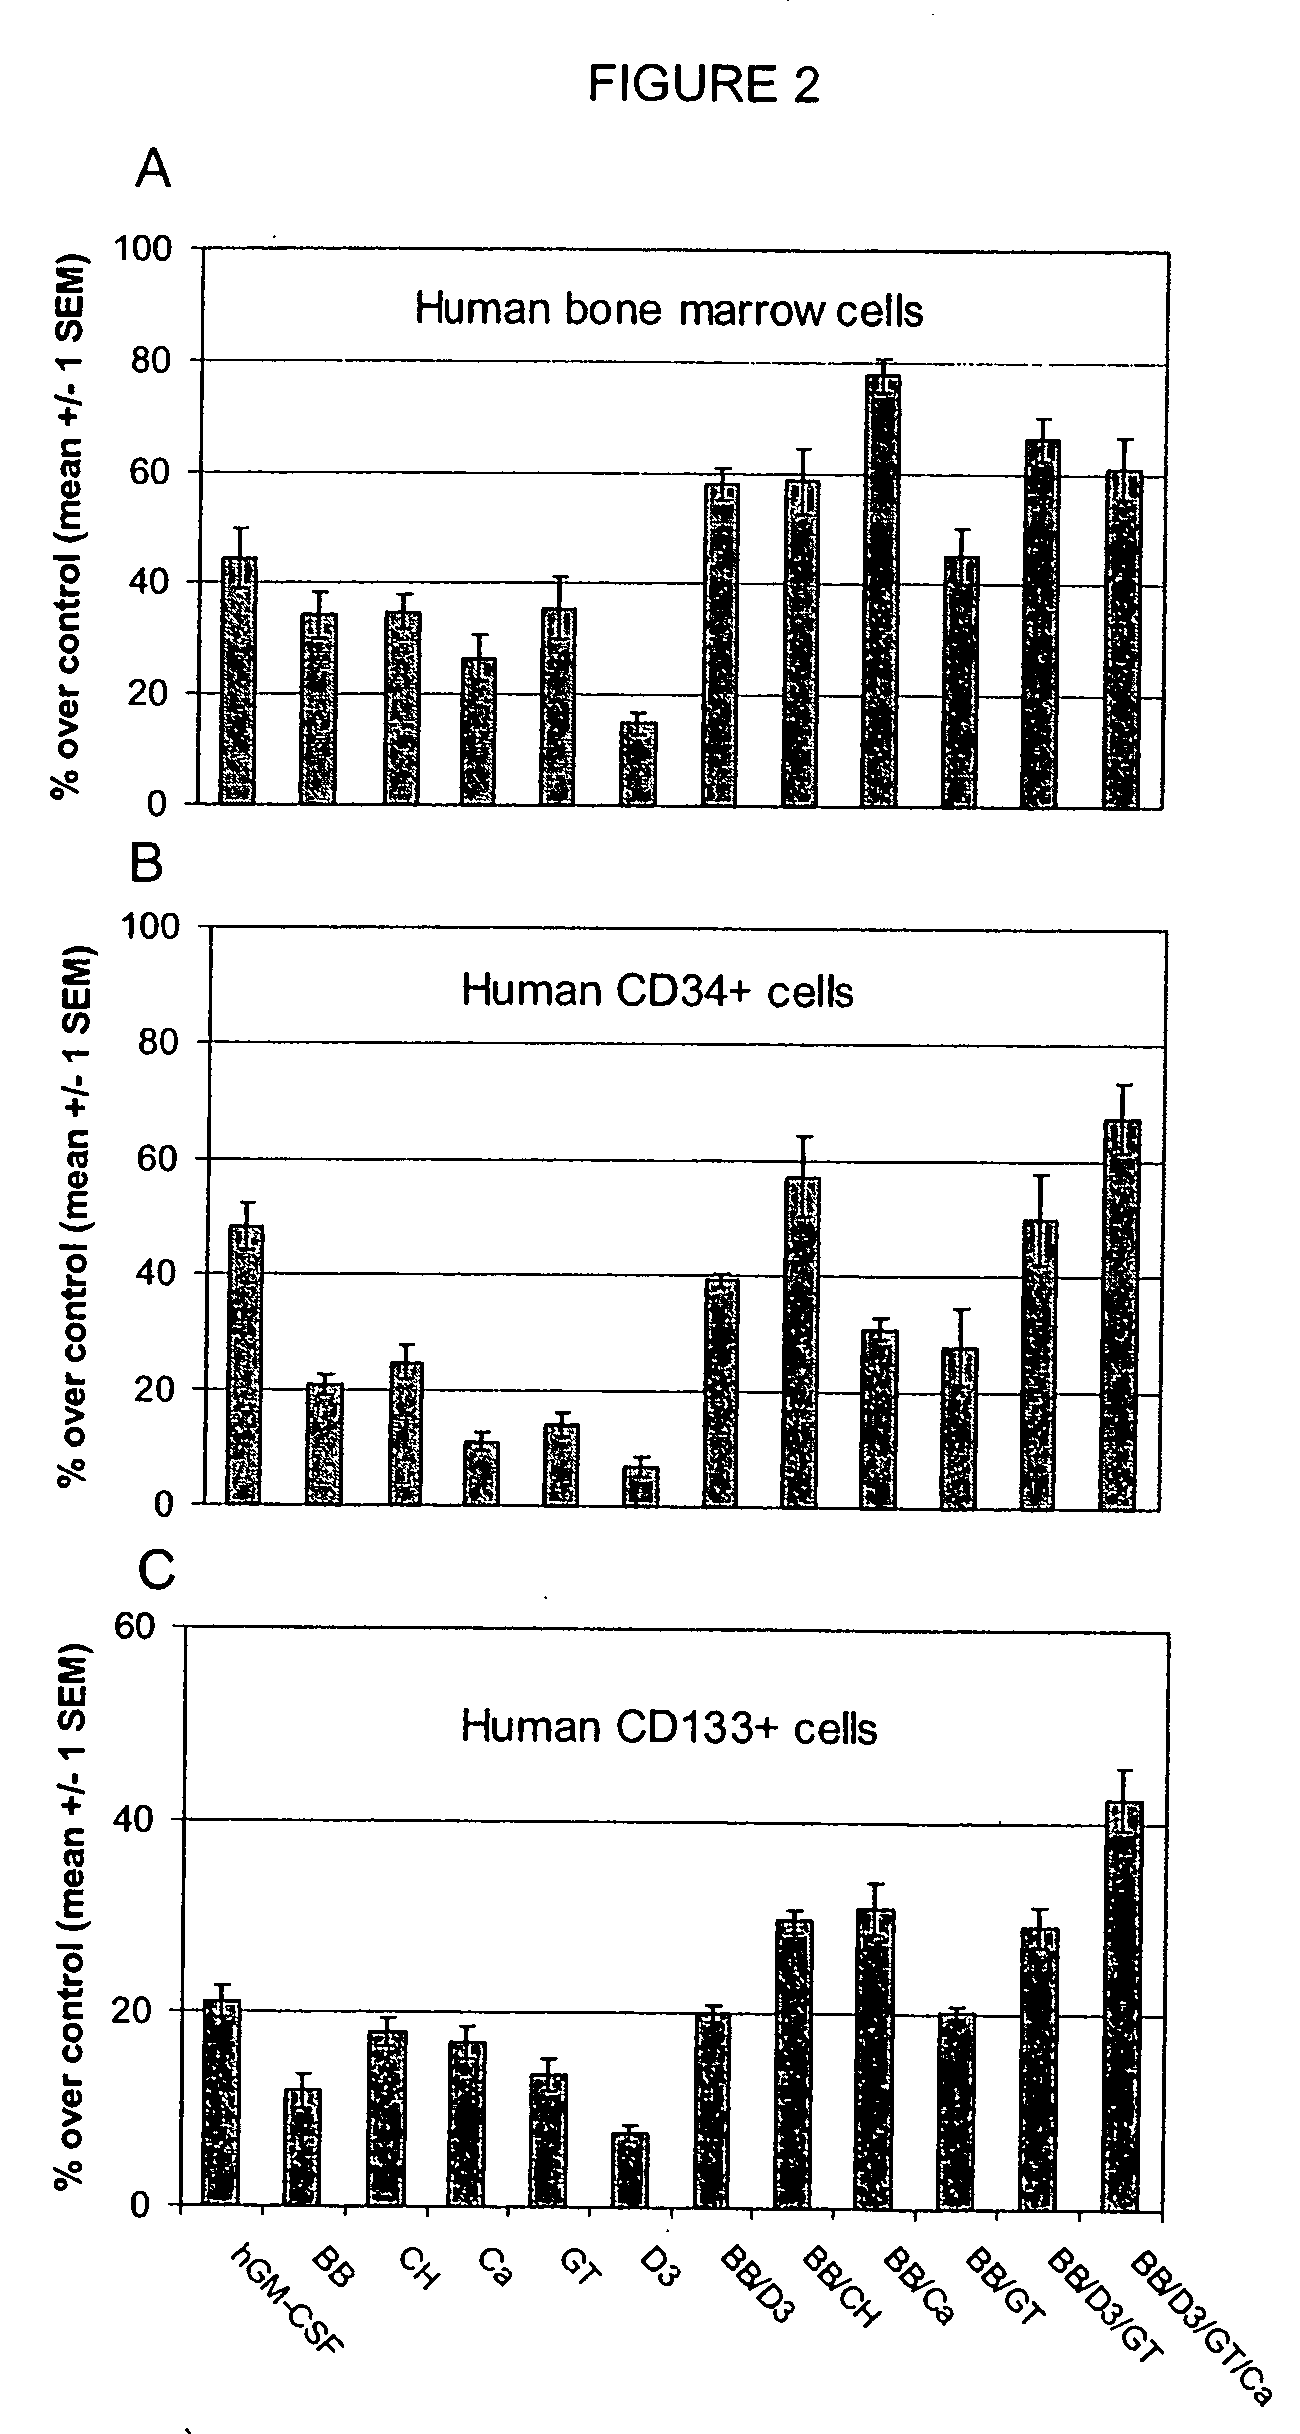 Combined effects of nutrients on proliferation of stem cells